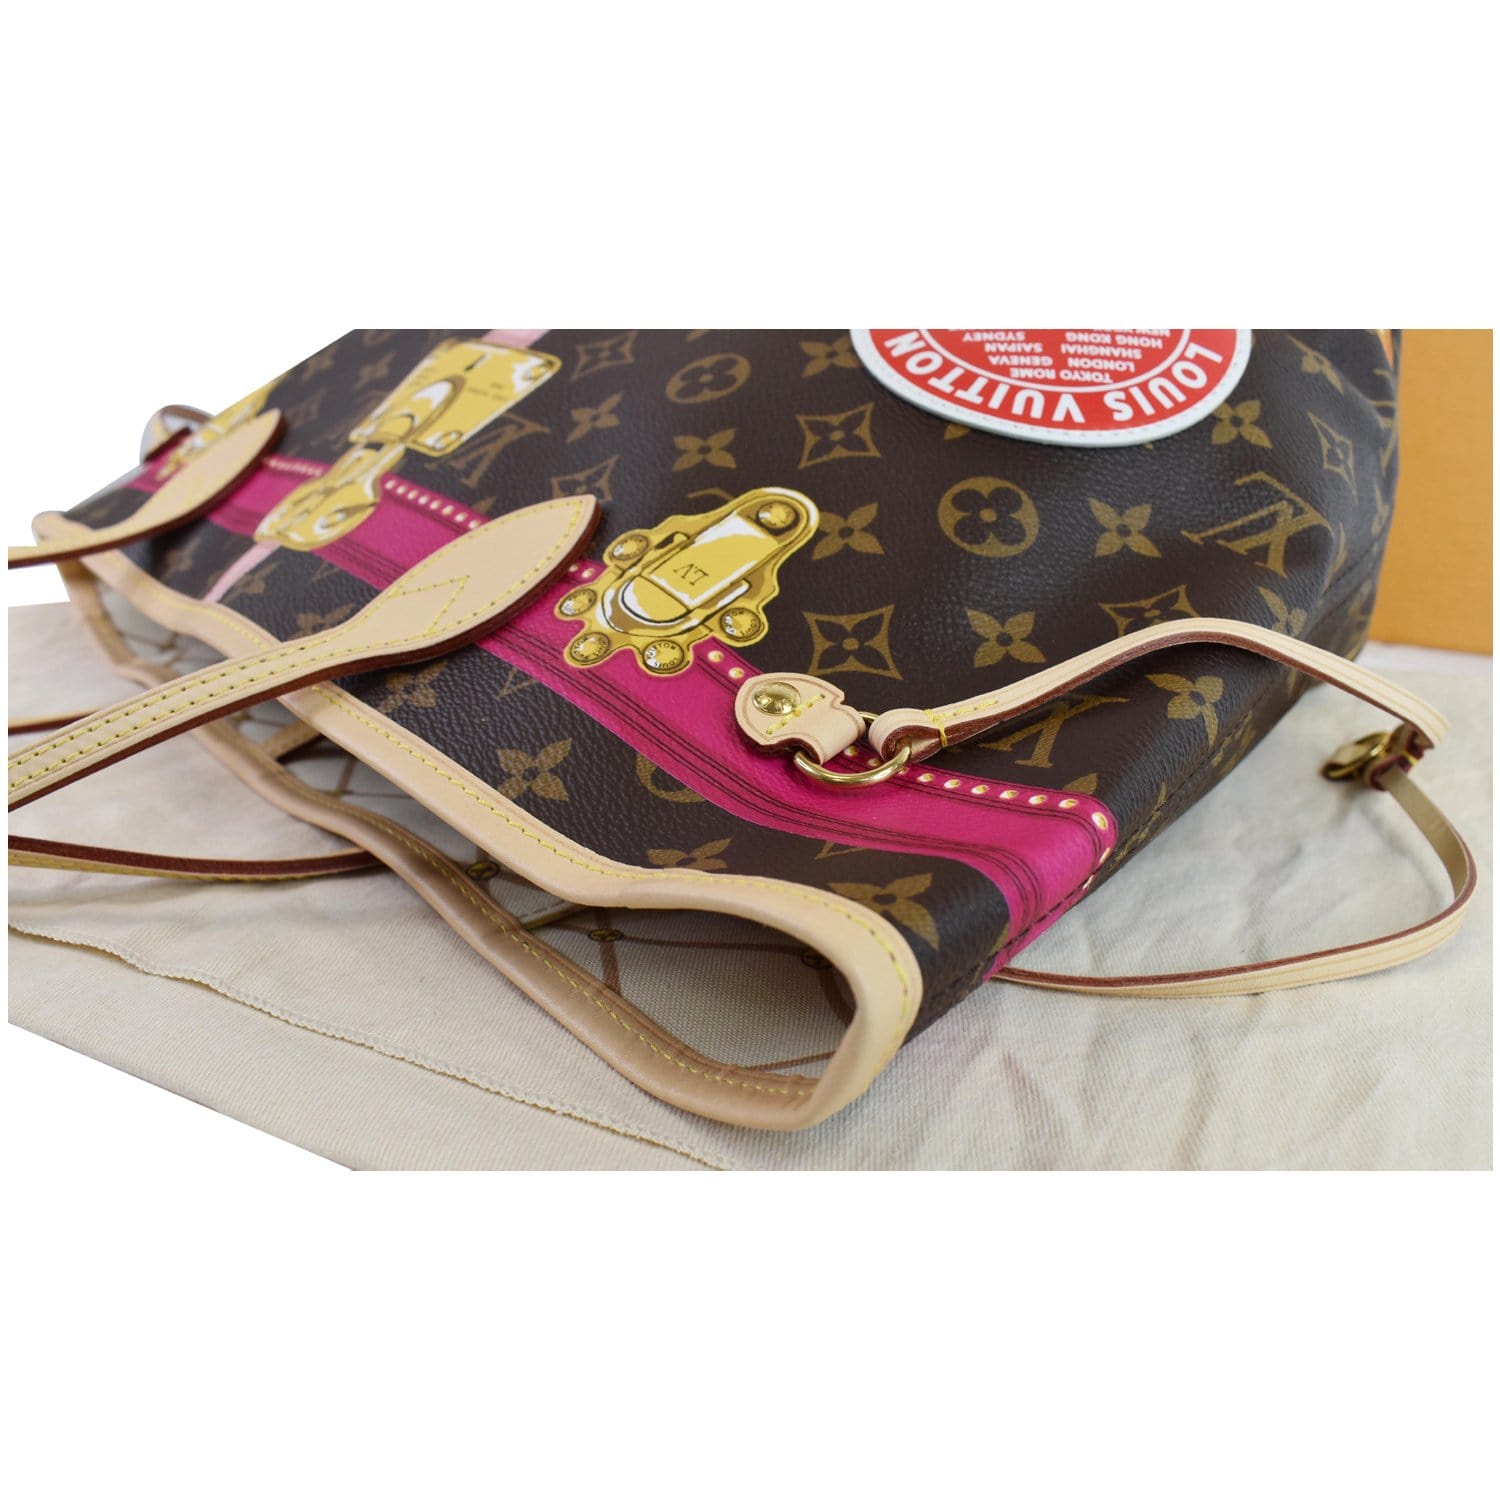 Louis Vuitton Summer Trunks Neverfull MM Tote Bags for Women